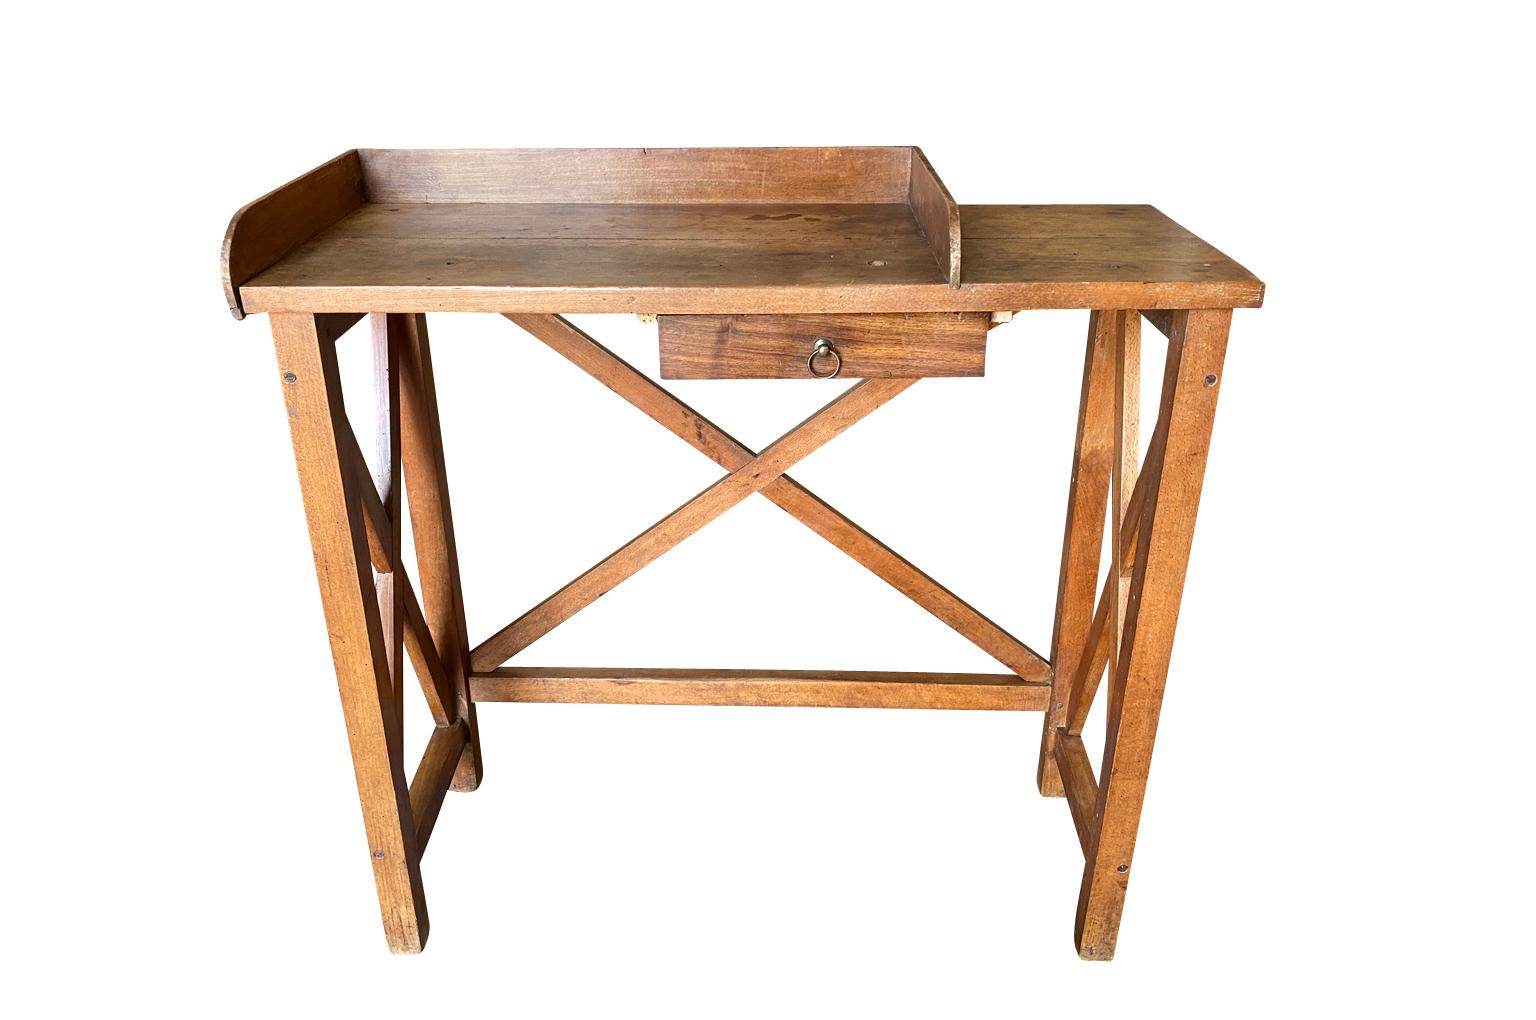 A very charming 19th Century Jeweler's Work Table from the South of France. Nicely constructed from beech. Serves beautifully as a bar counter or a restaurant host's table.